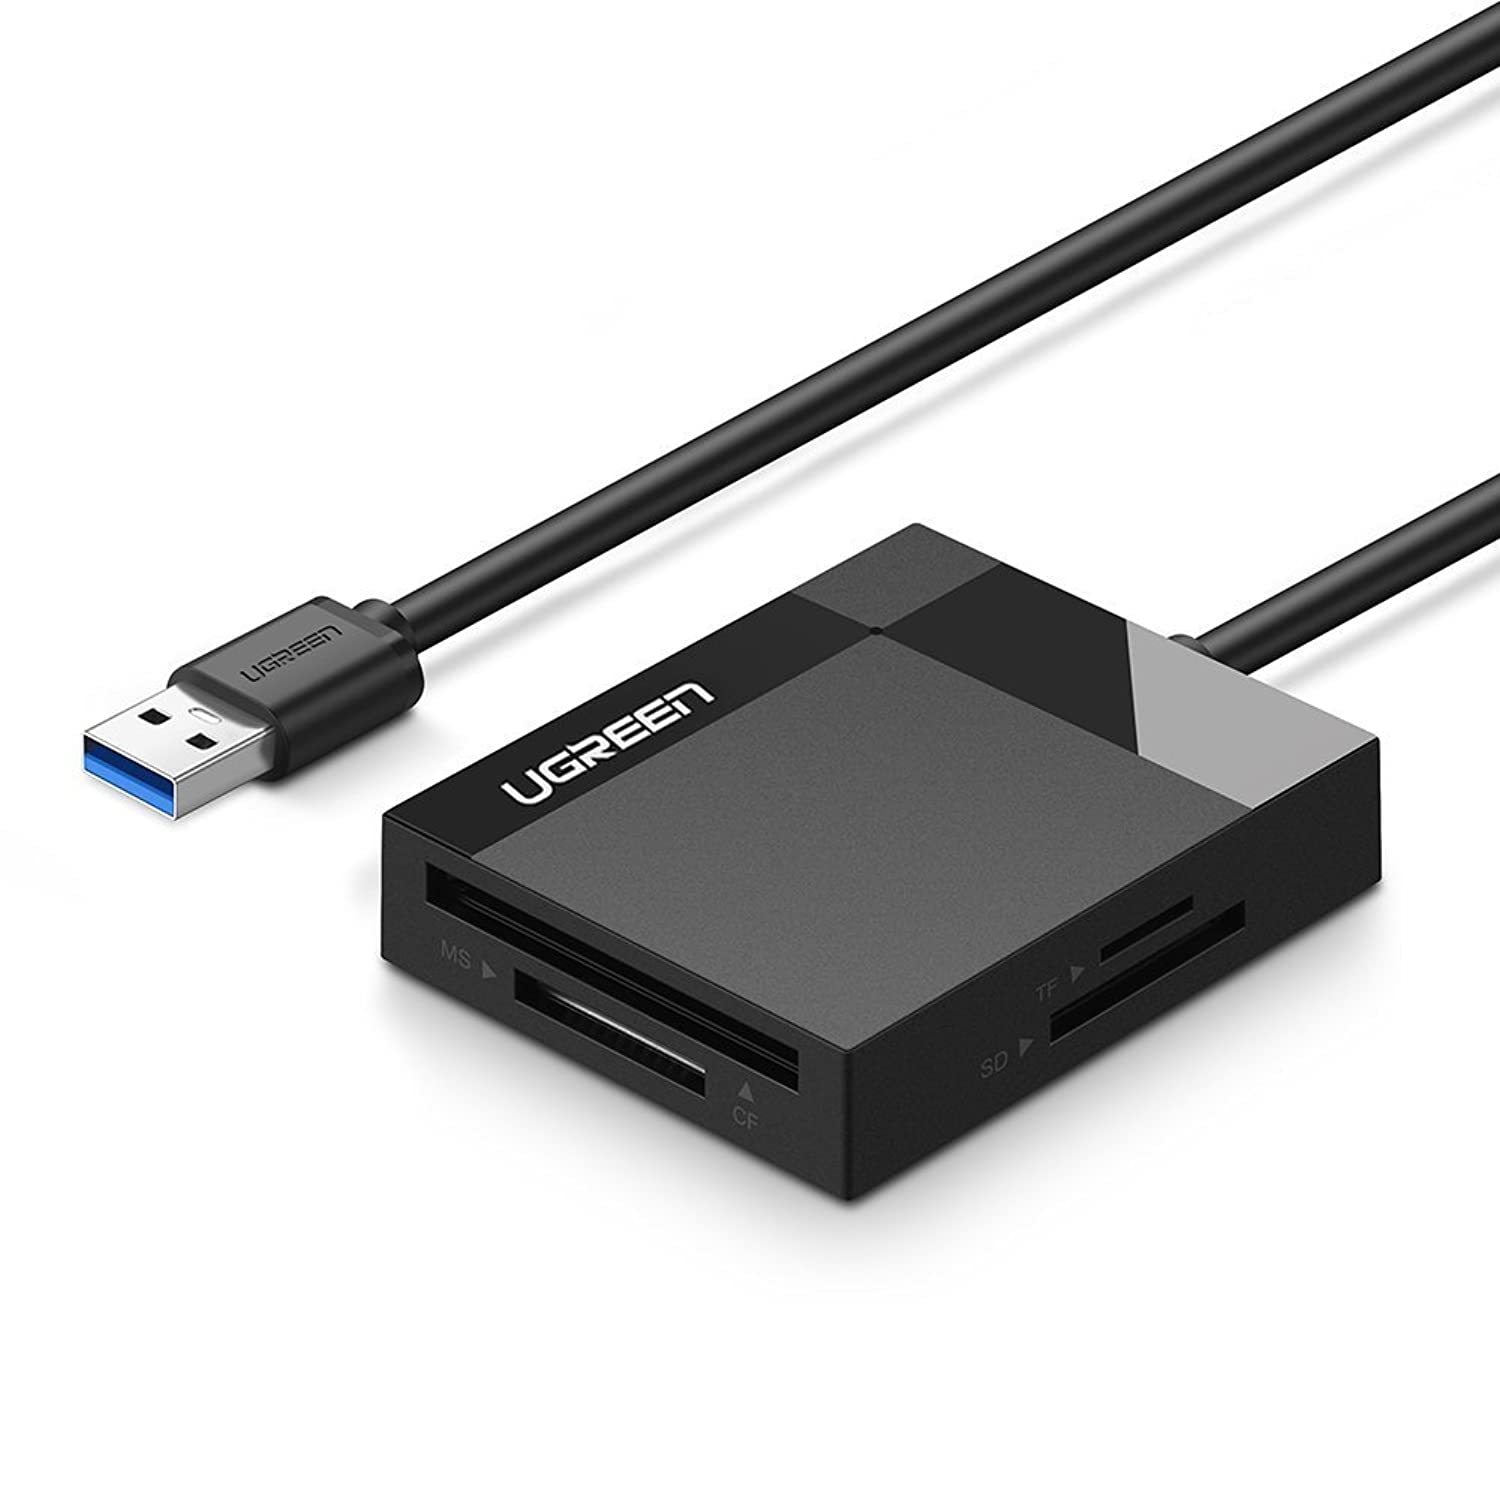 Primary image for UGREEN SD Card Reader USB 3.0 Card Hub Adapter 5Gbps Read 4 Cards Simultaneously